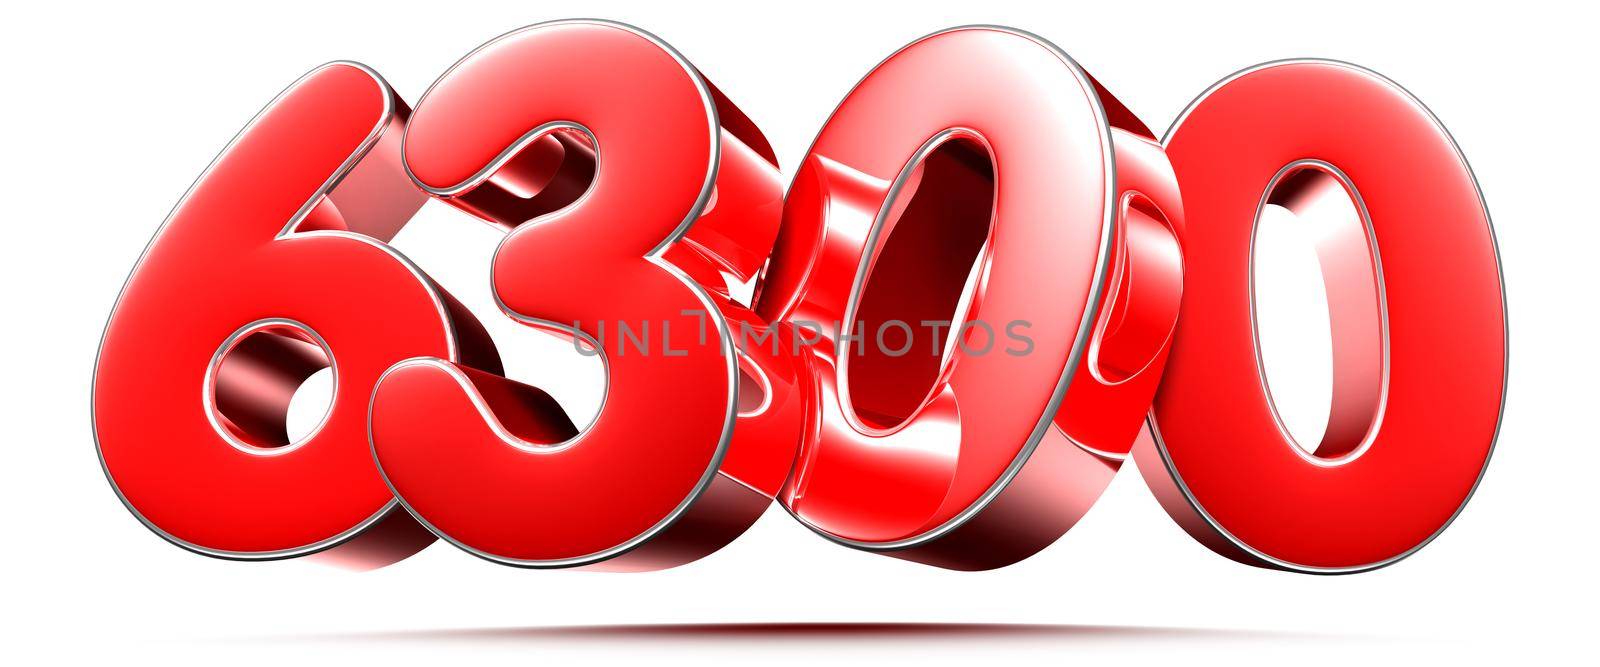 Rounded red numbers 6300 on white background 3D illustration with clipping path by thitimontoyai